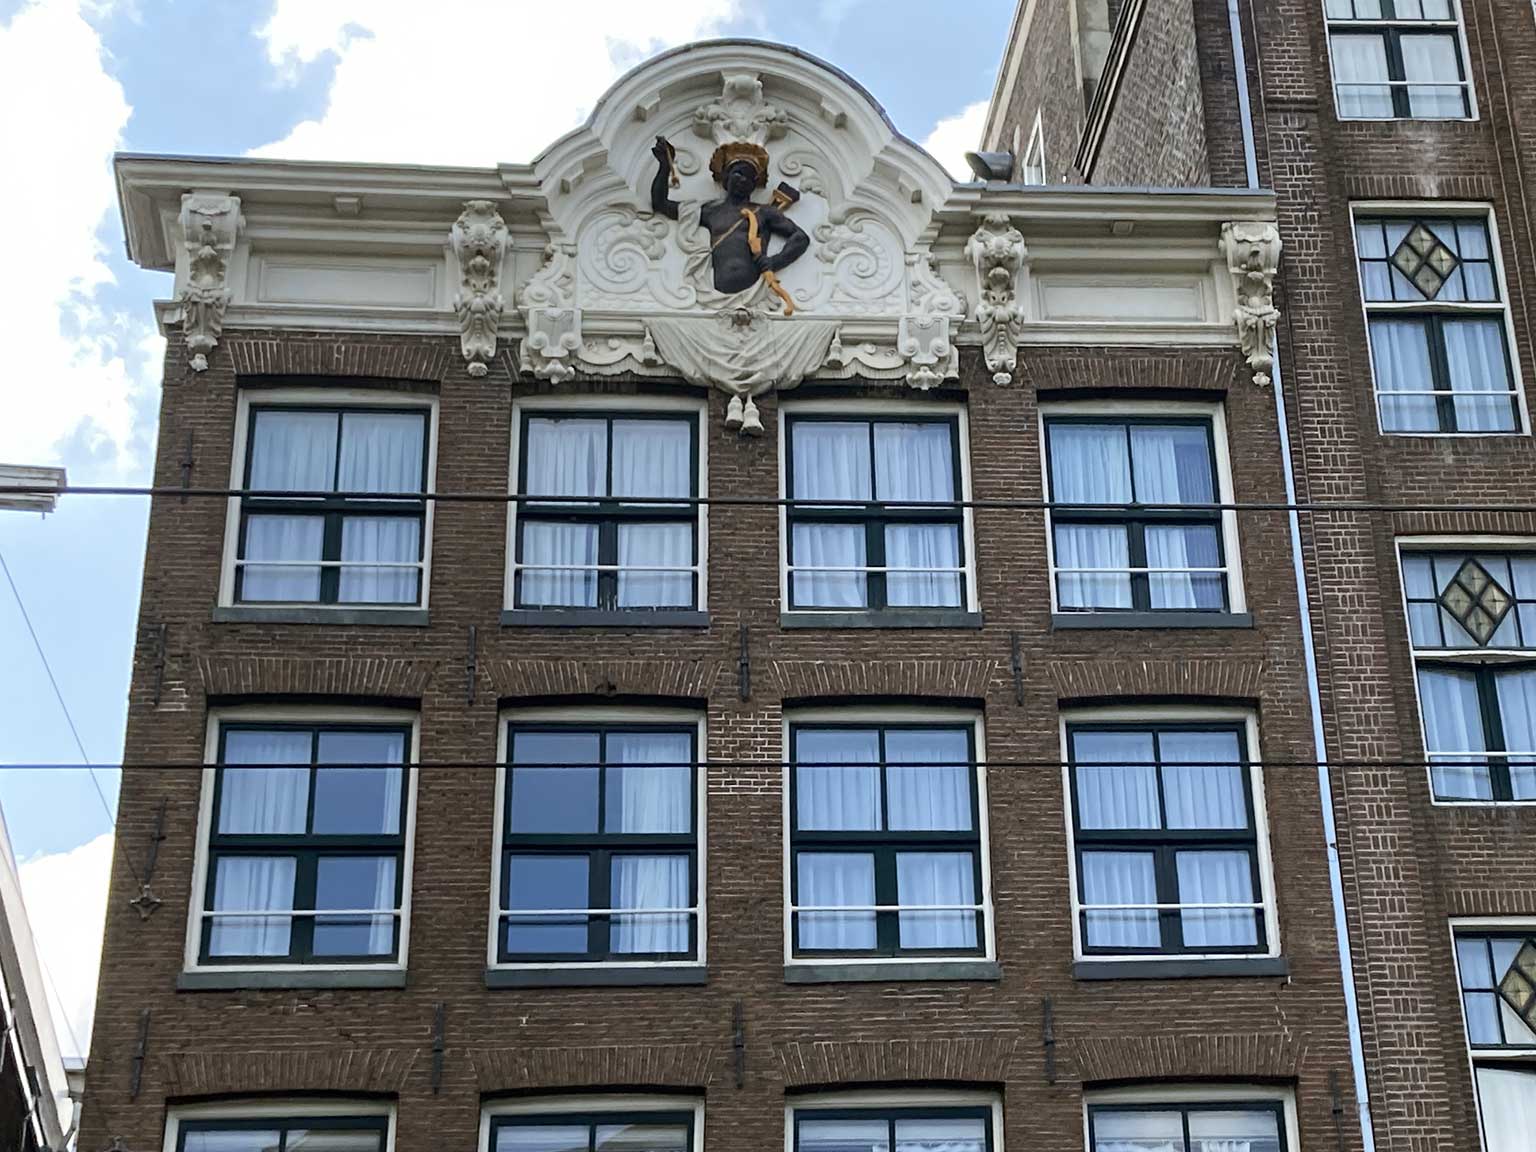 Close-up of the top gable of Rokin 64, Amsterdam, a Moor holding a bow and arrow